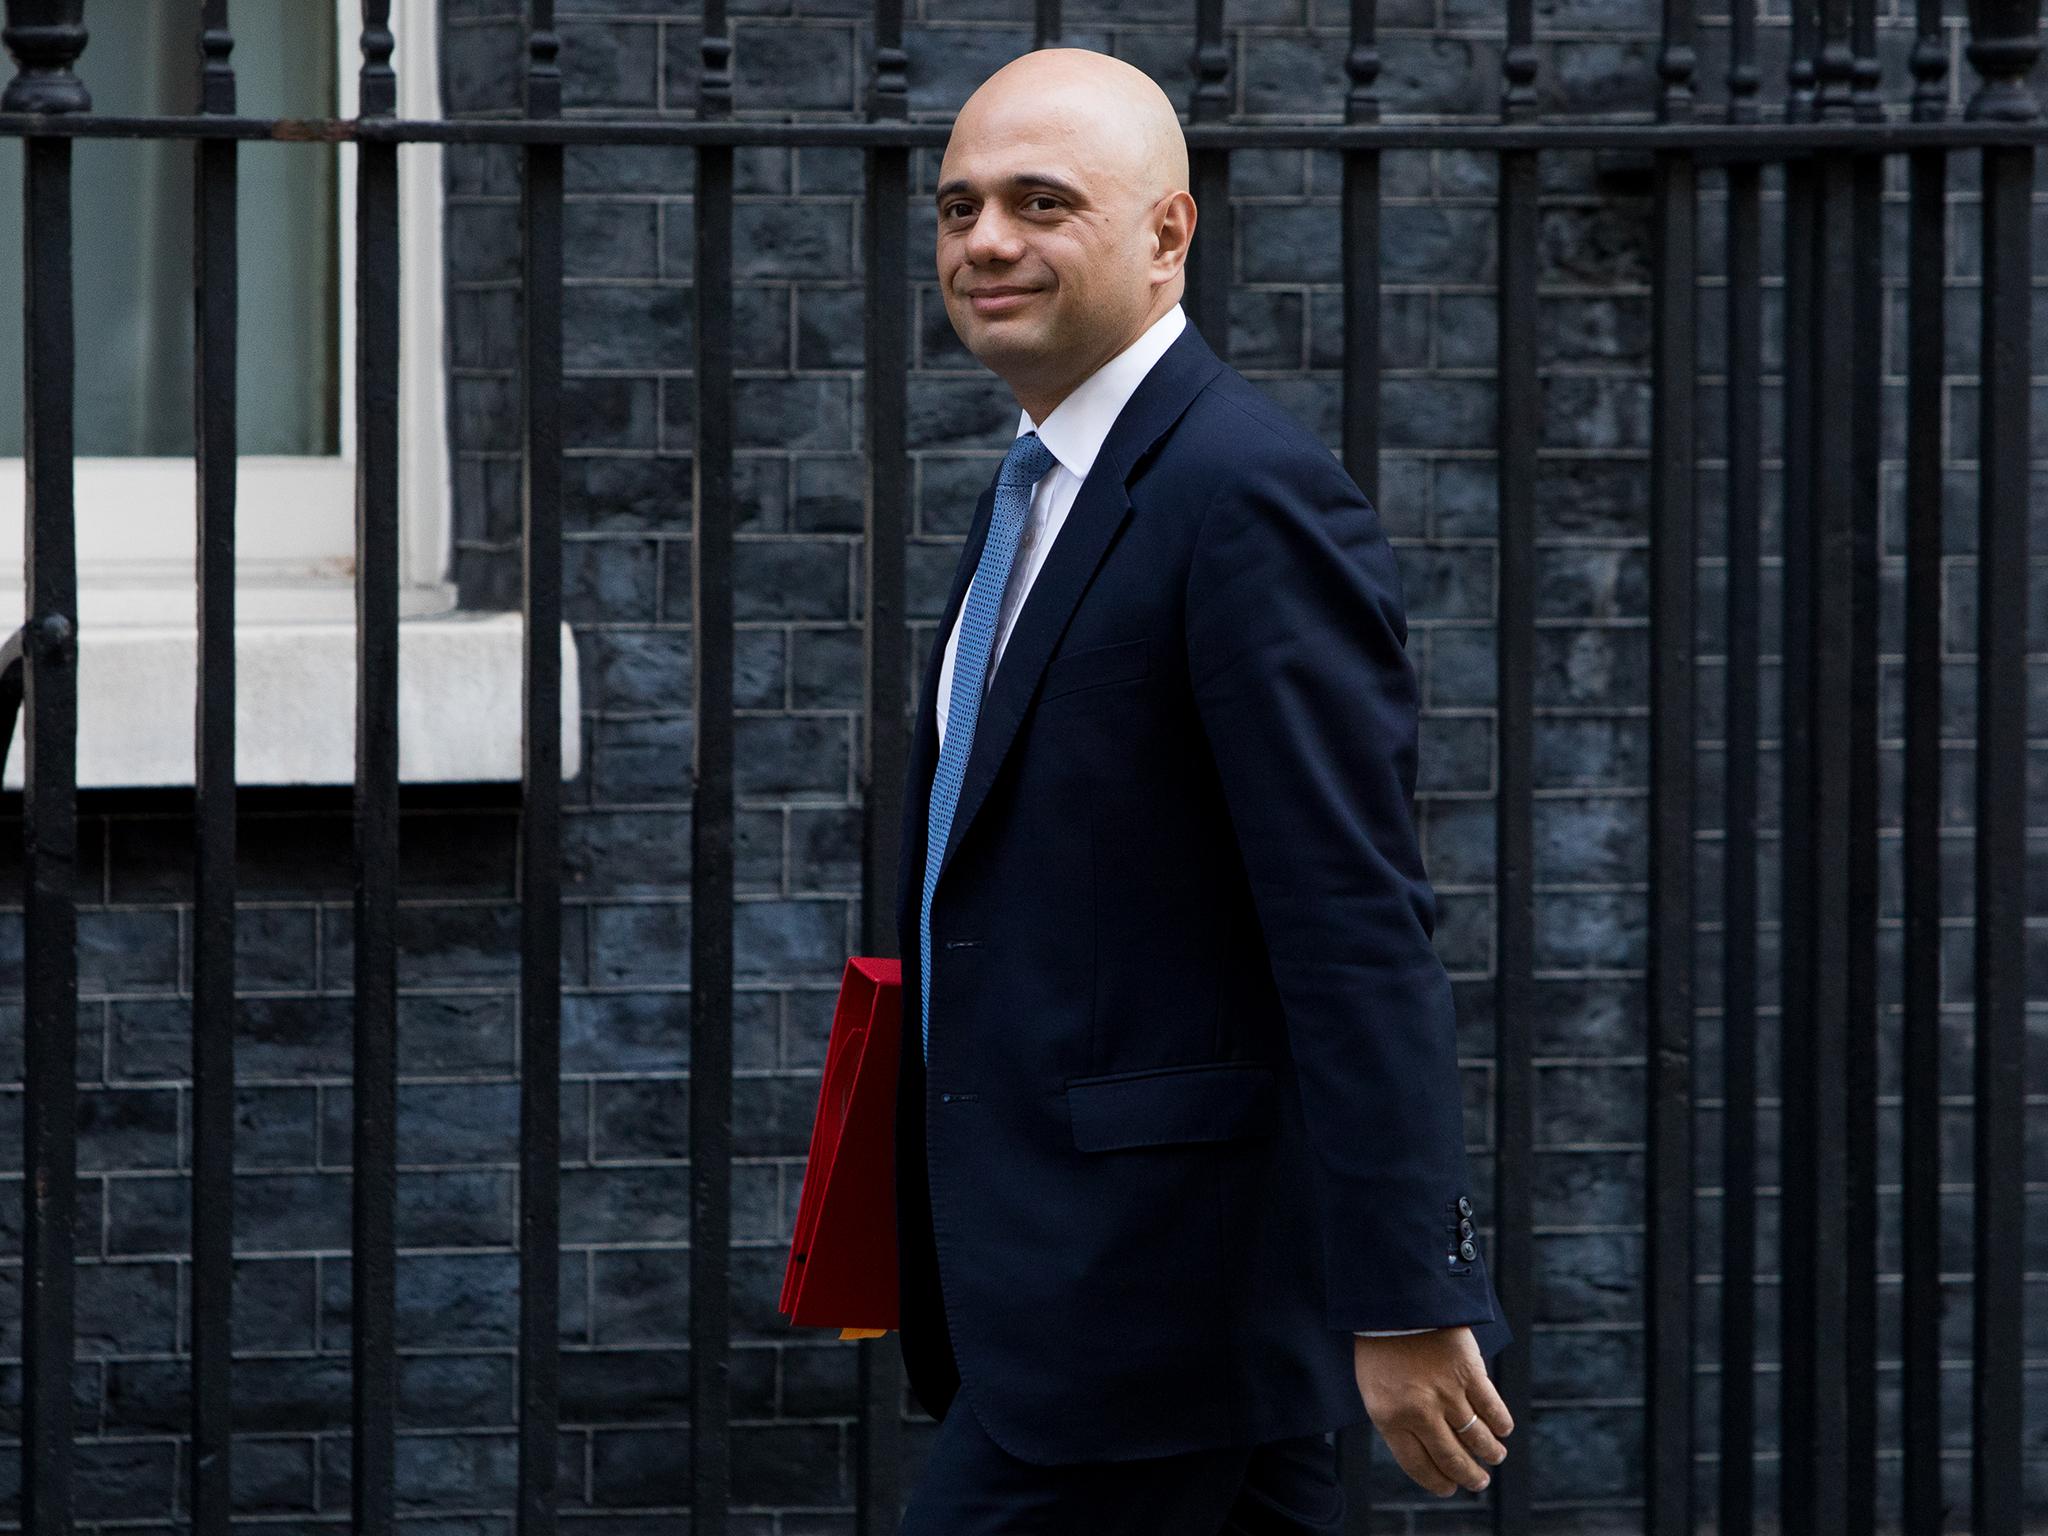 Sajid Javid, the home secretary, is said to be sceptical about the migration target and has dropped Theresa May’s ‘hostile environment’ policy